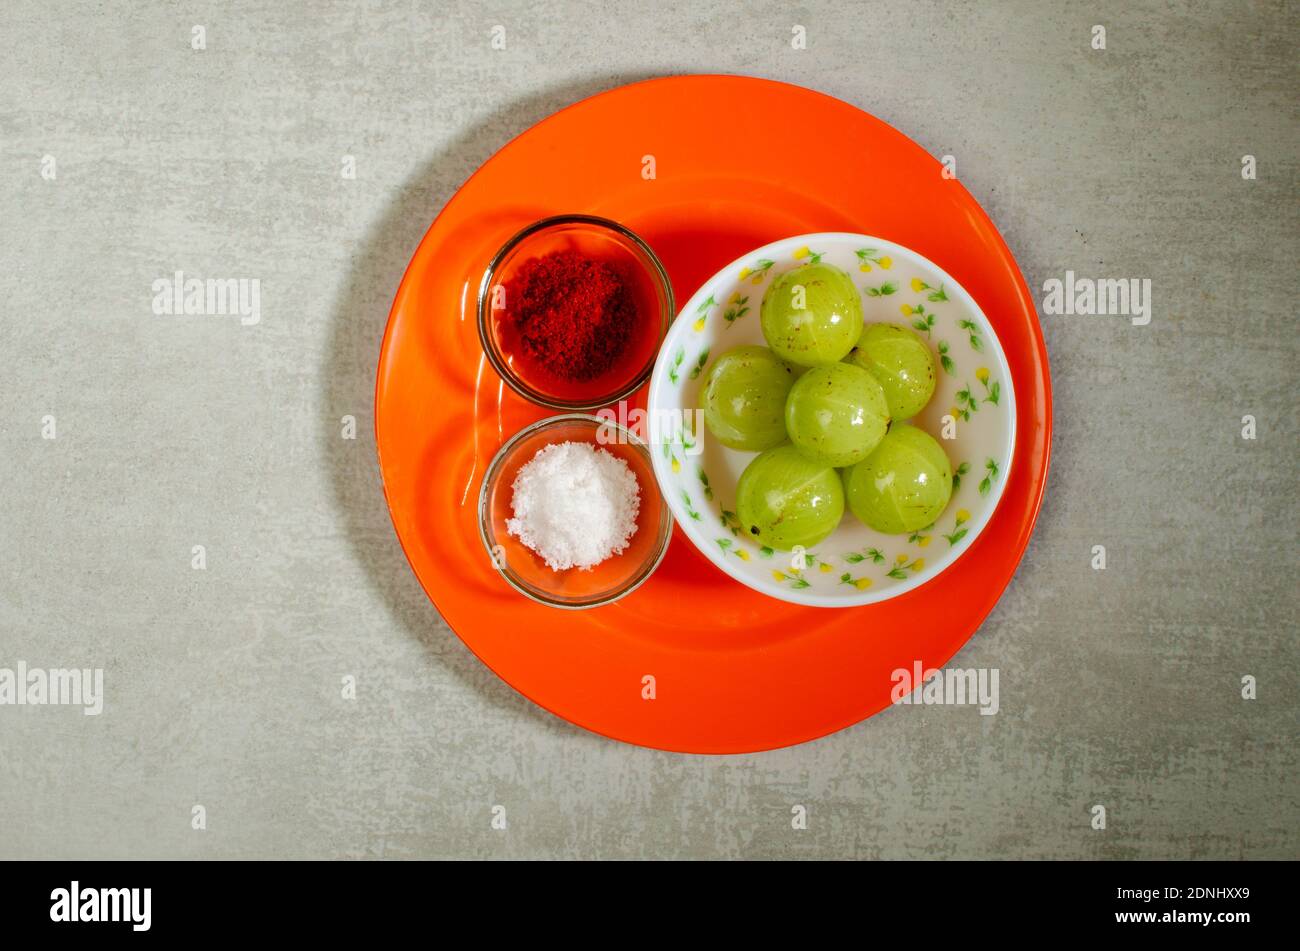 Raw Amla, Indian Gooseberry, Phyllanthus emblica. Sour in taste with Red Chilli Powder, Salt in  Orange Dish on Grey Abstract background Stock Photo